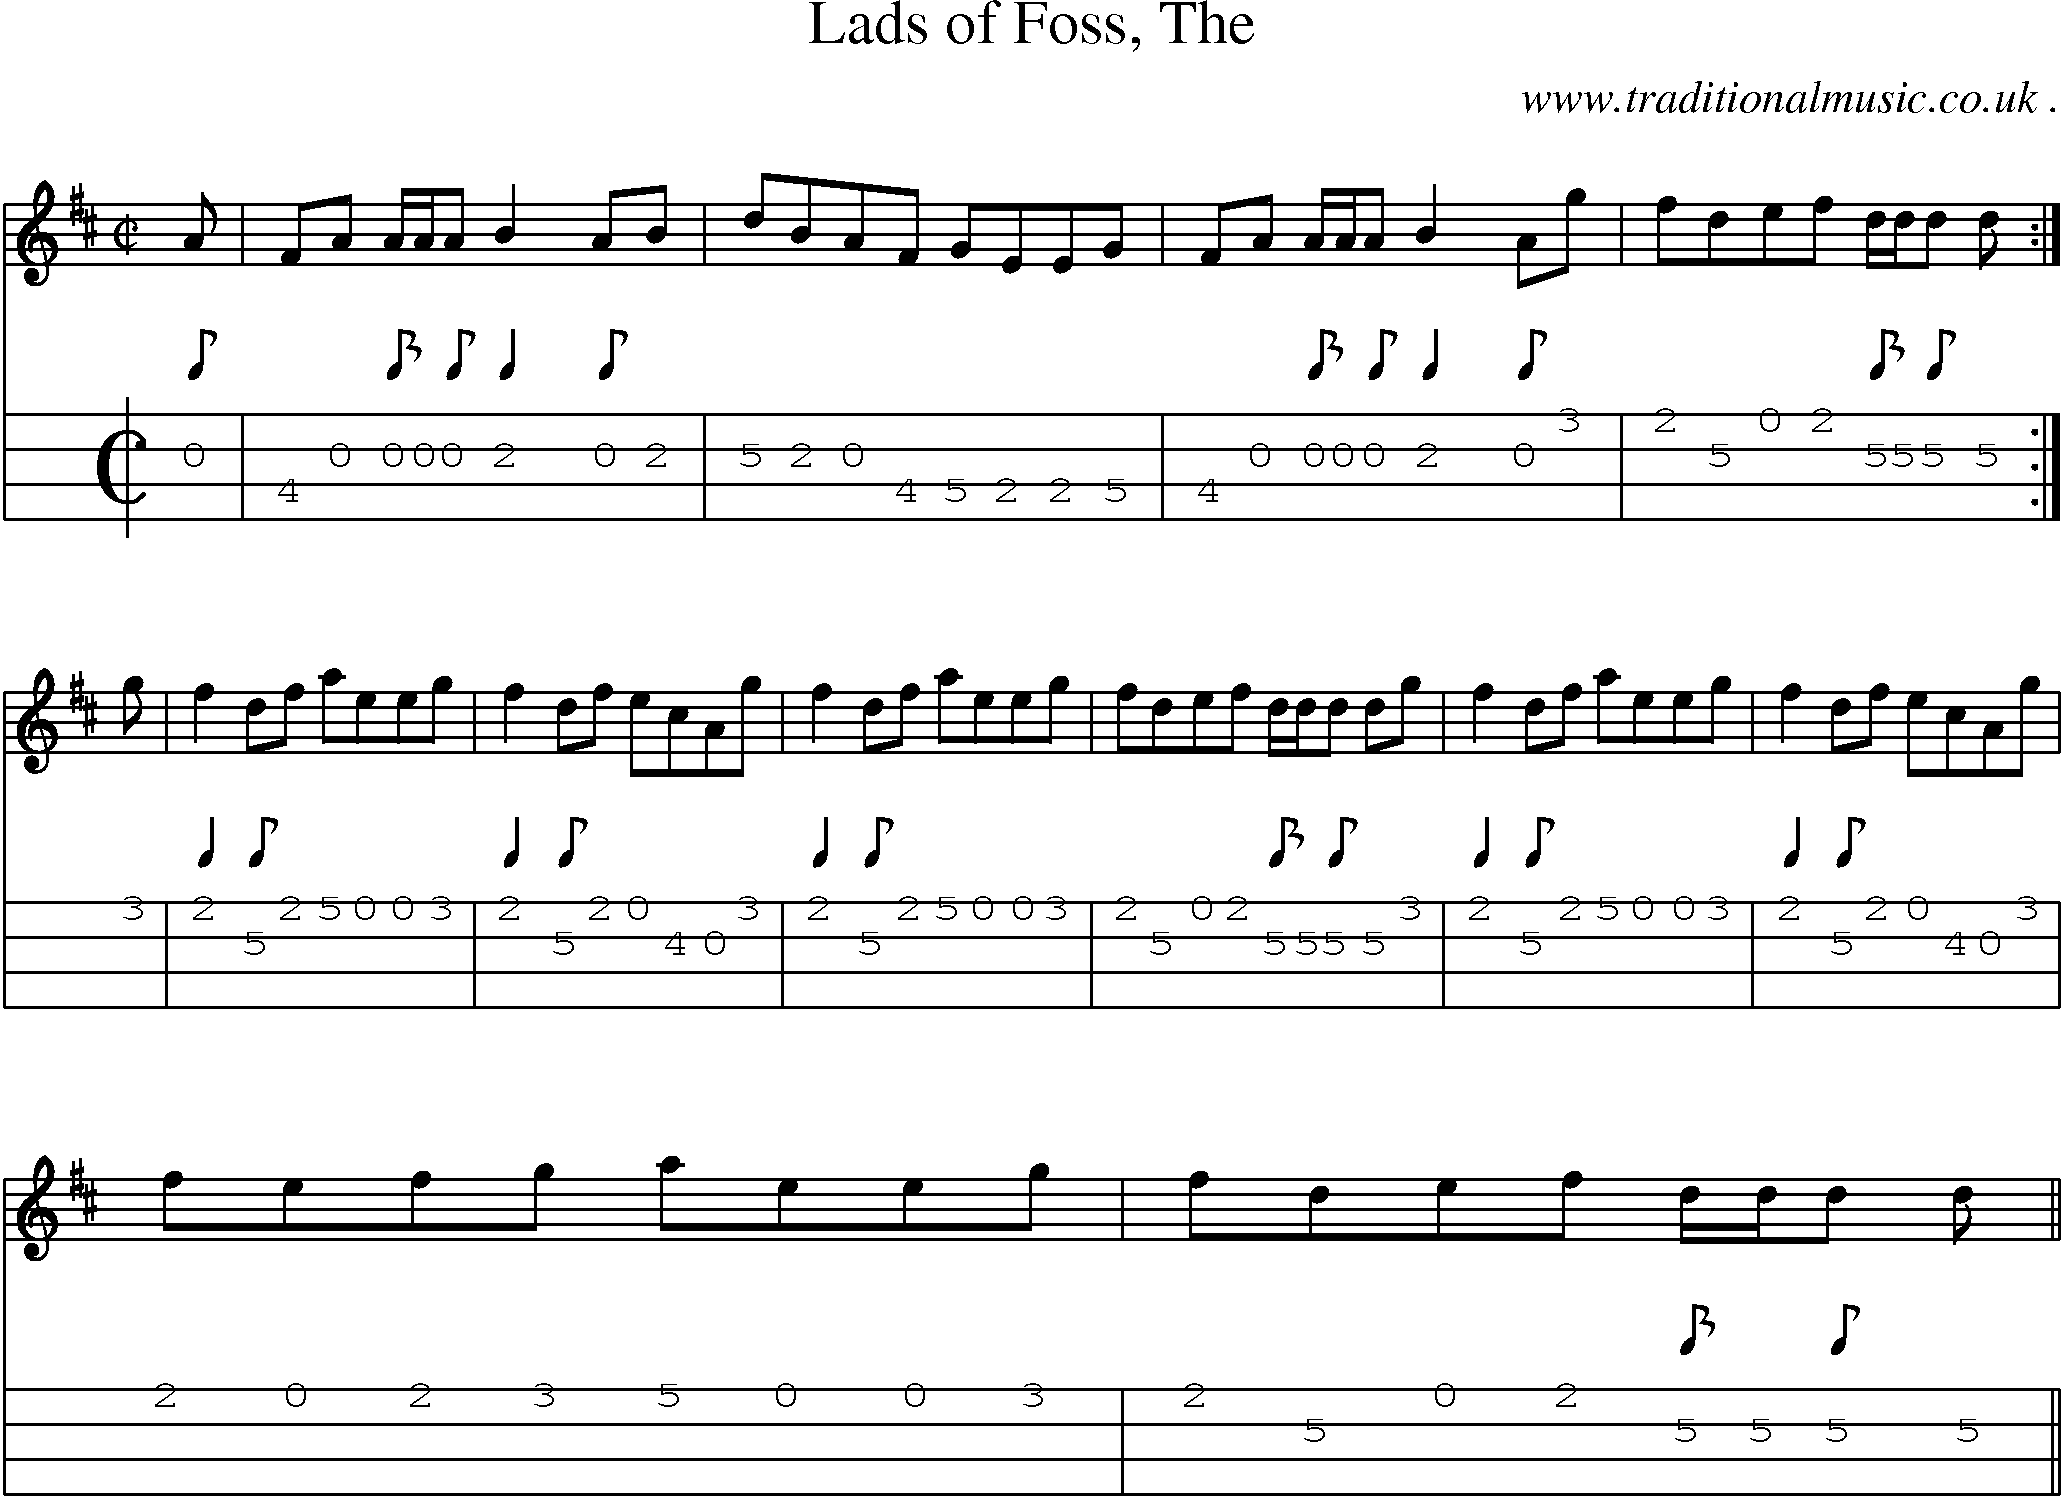 Sheet-music  score, Chords and Mandolin Tabs for Lads Of Foss The